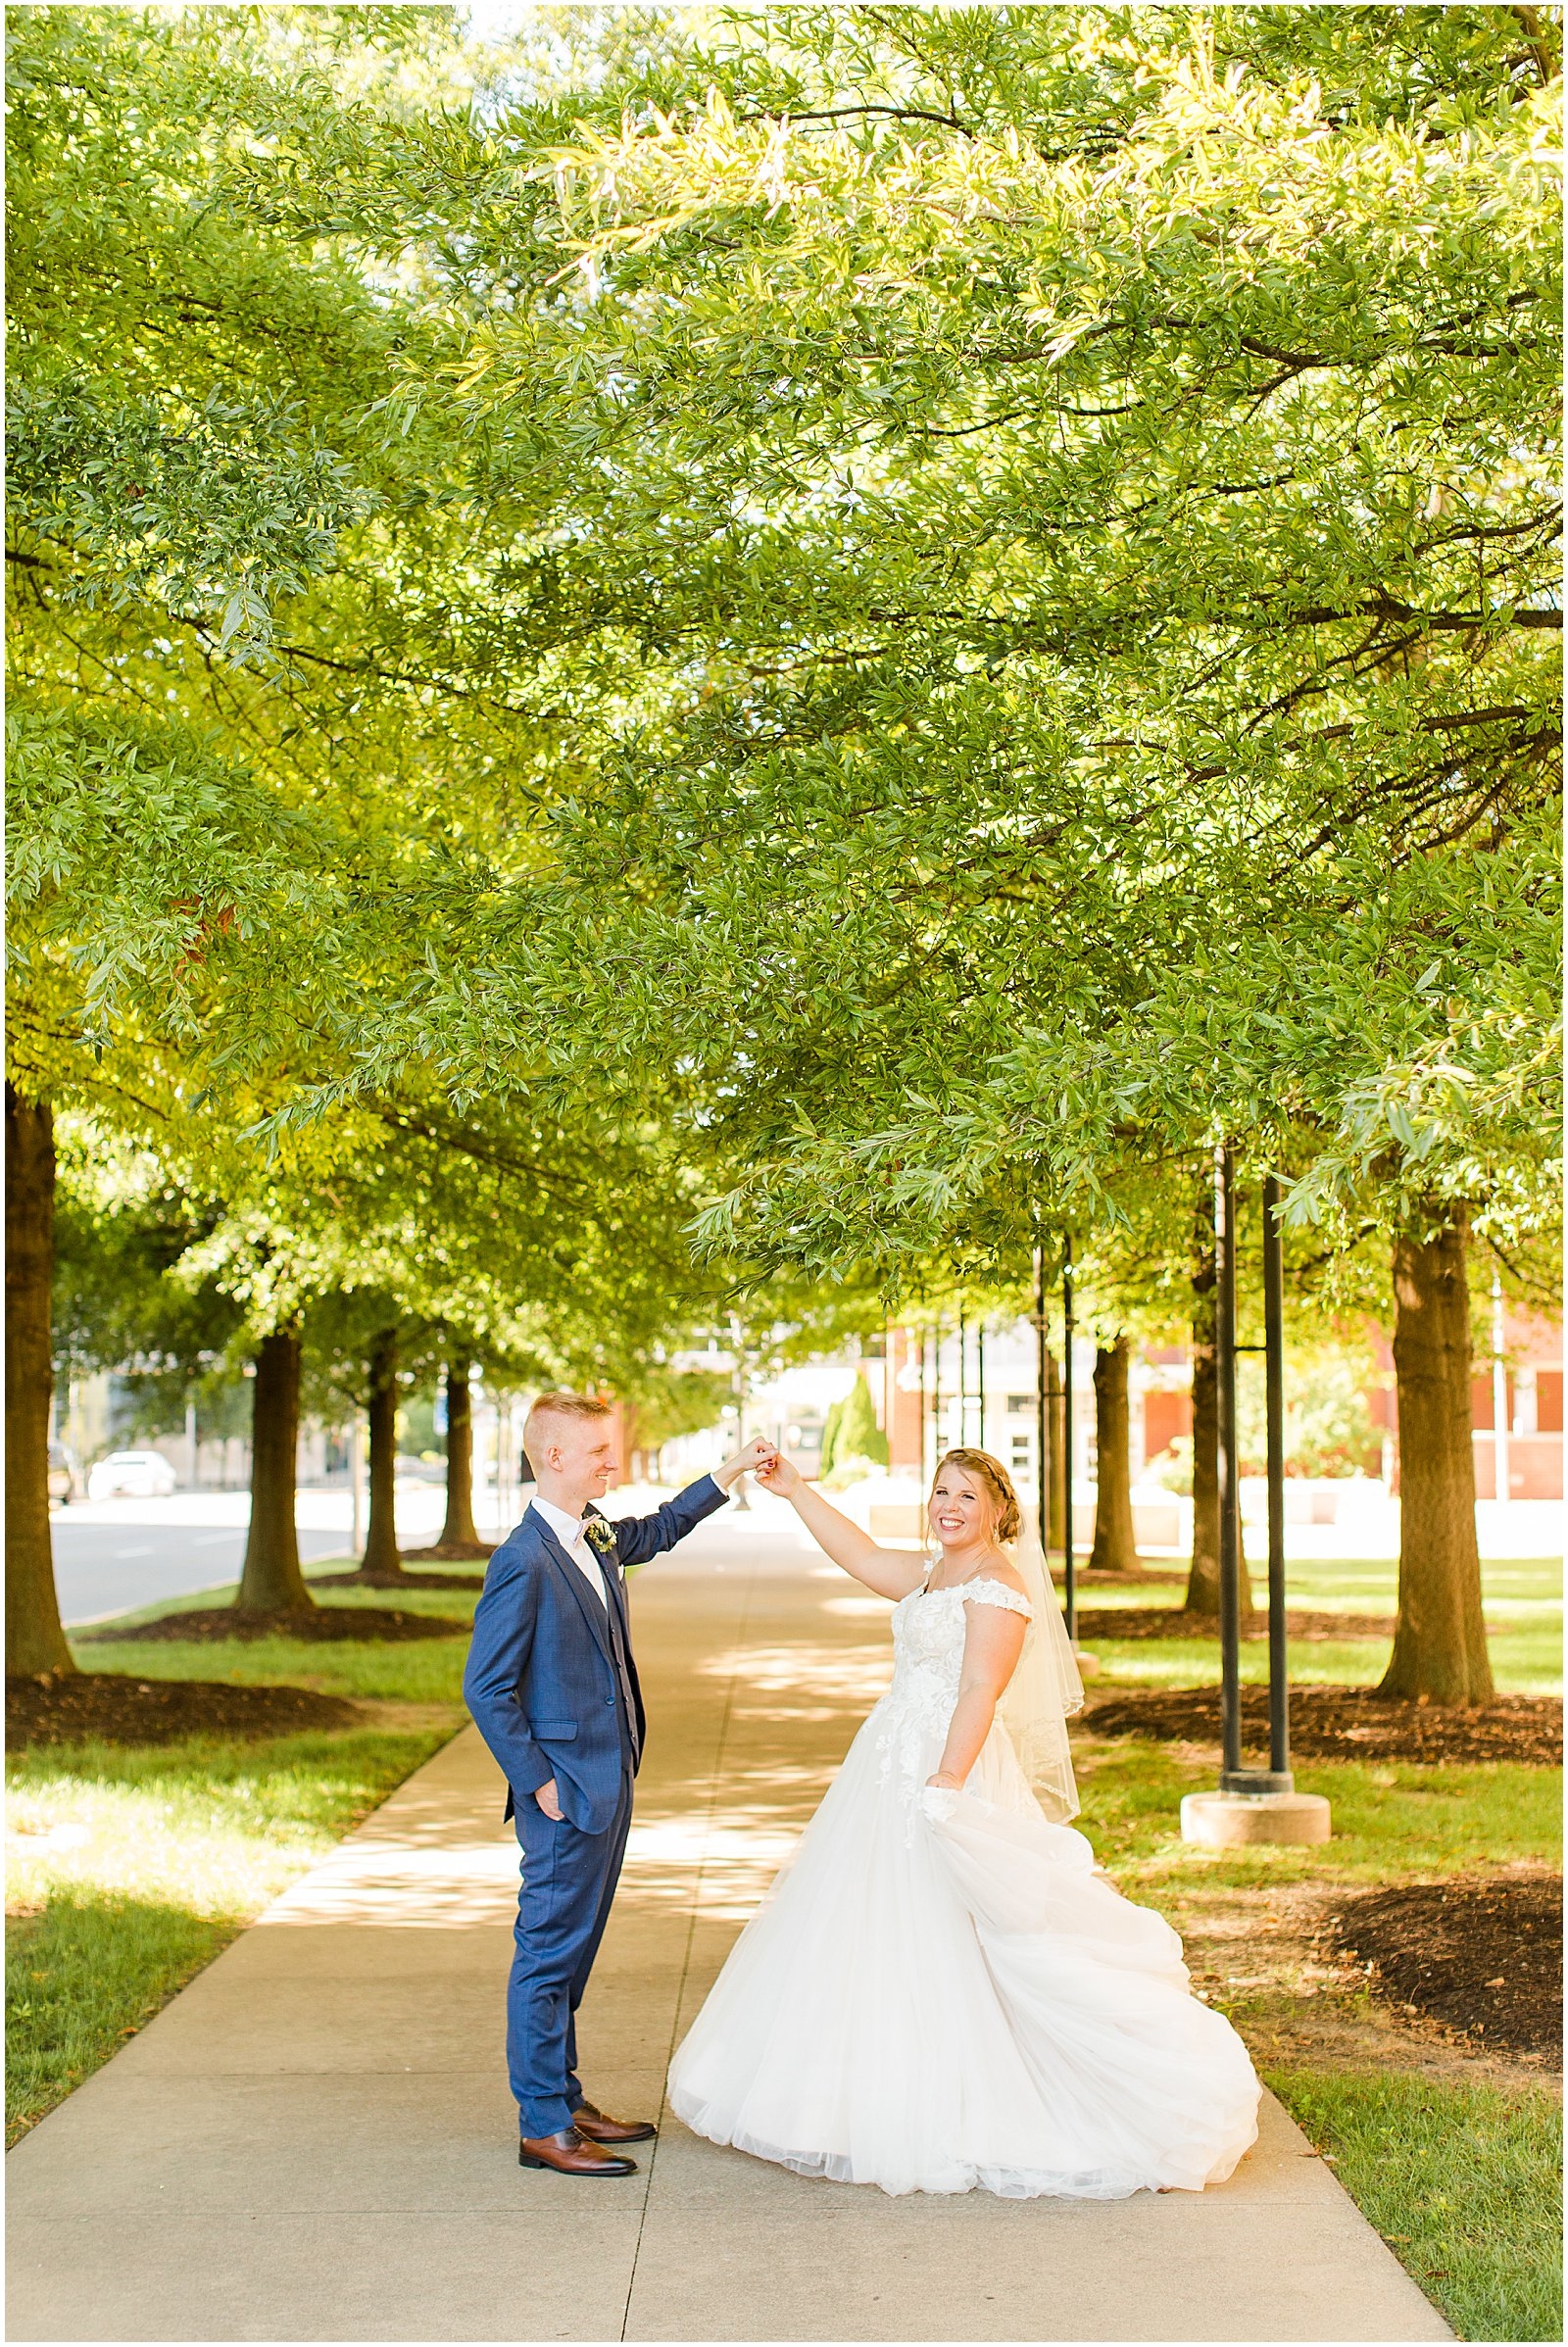 A Beautiful Summer Wedding at Funxion | Amber and Alex | Bret and Brandie Photography0113.jpg